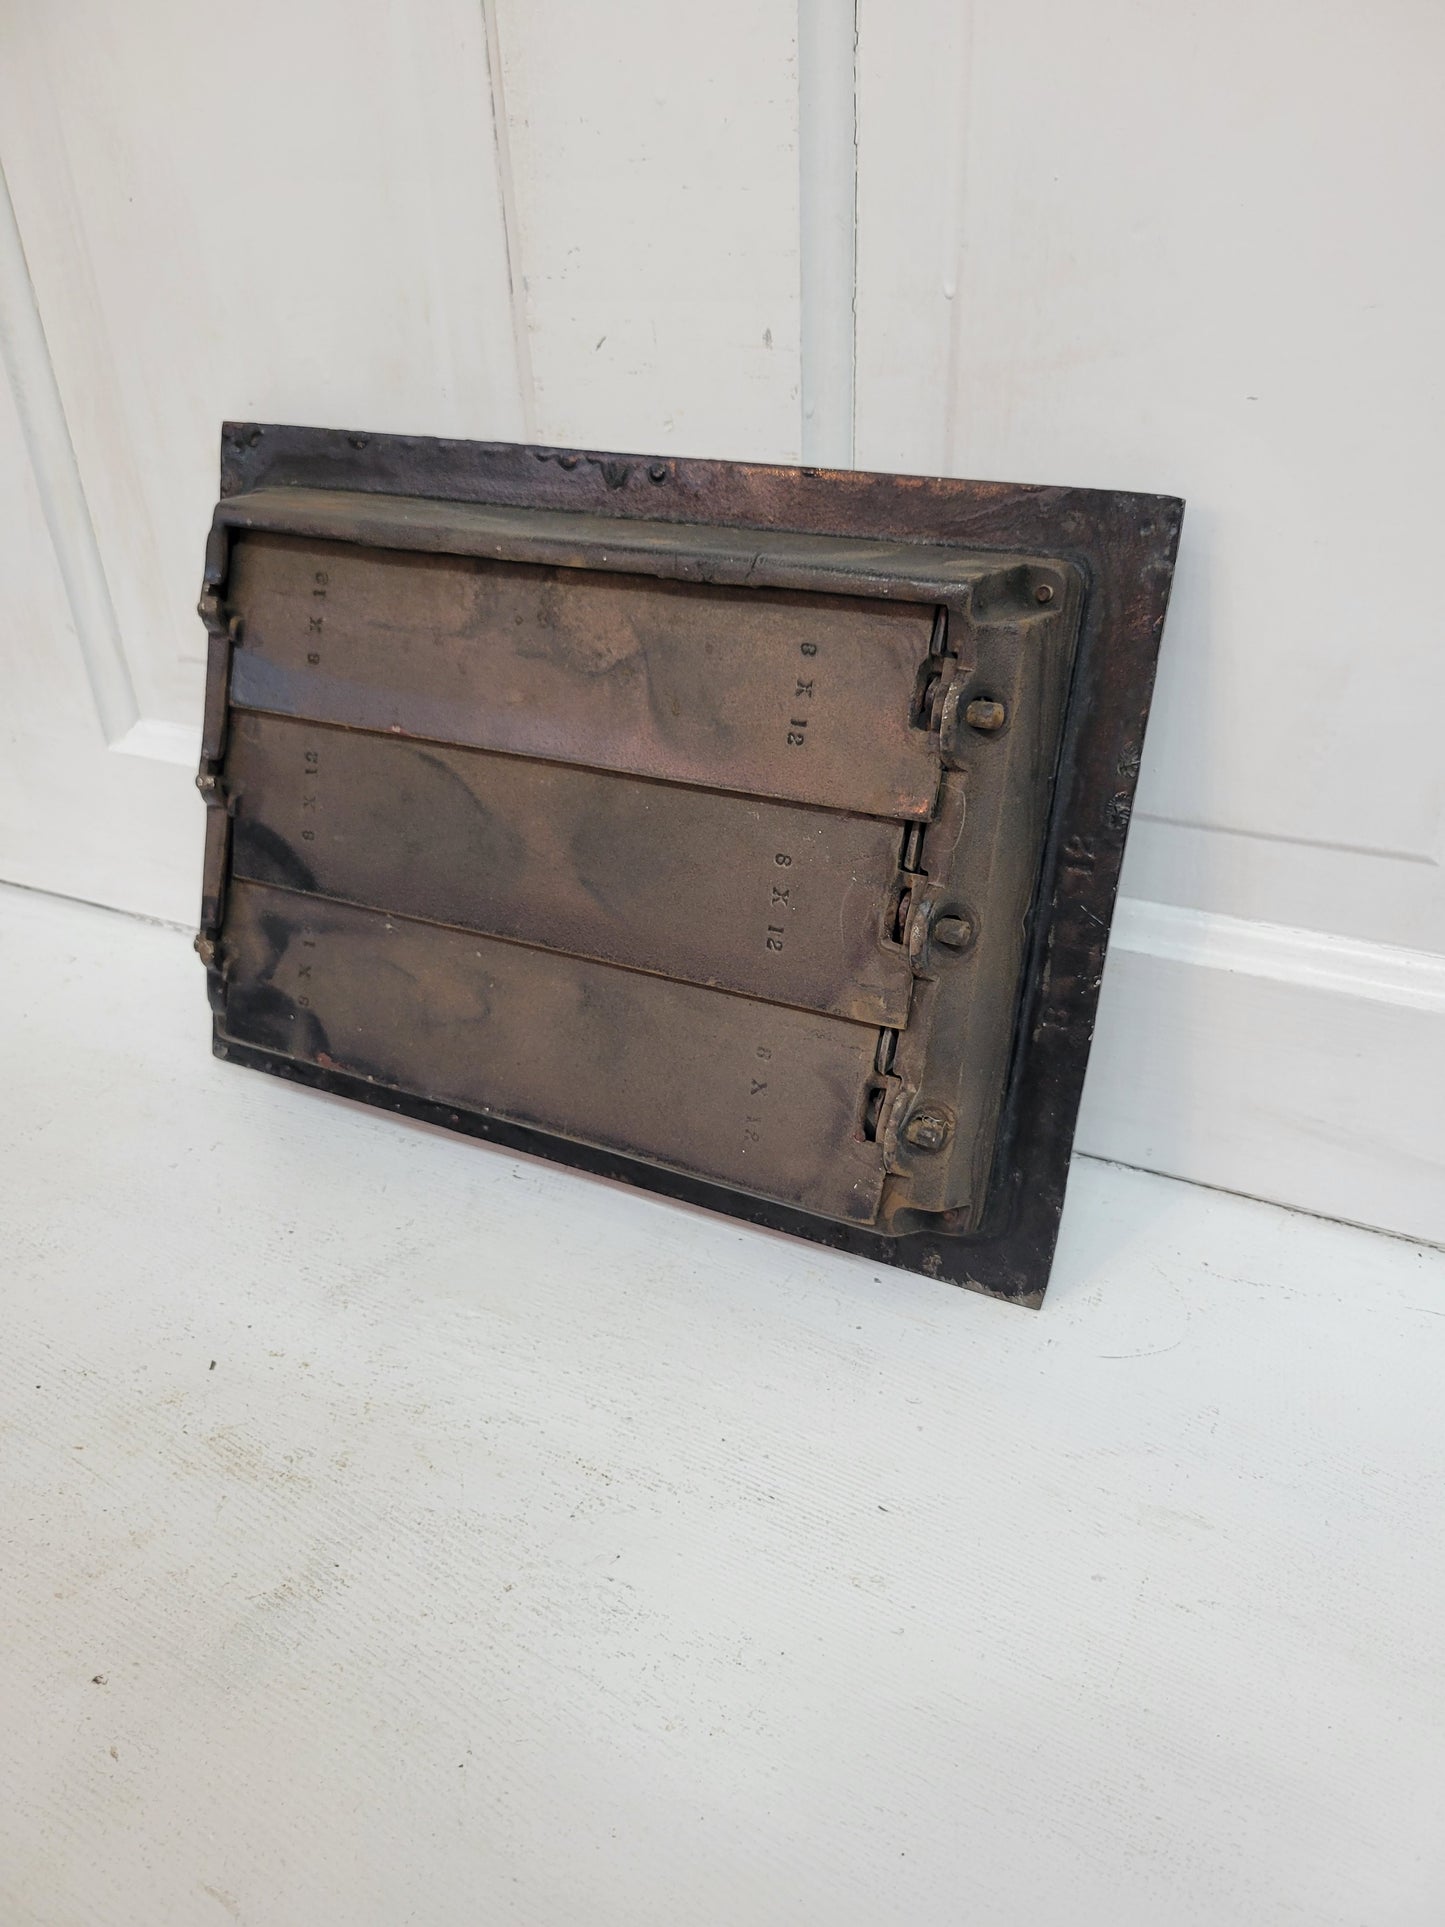 10 x 14 Antique Cast Iron Working Vent Cover, Floor Register Cover with Dampers #092701